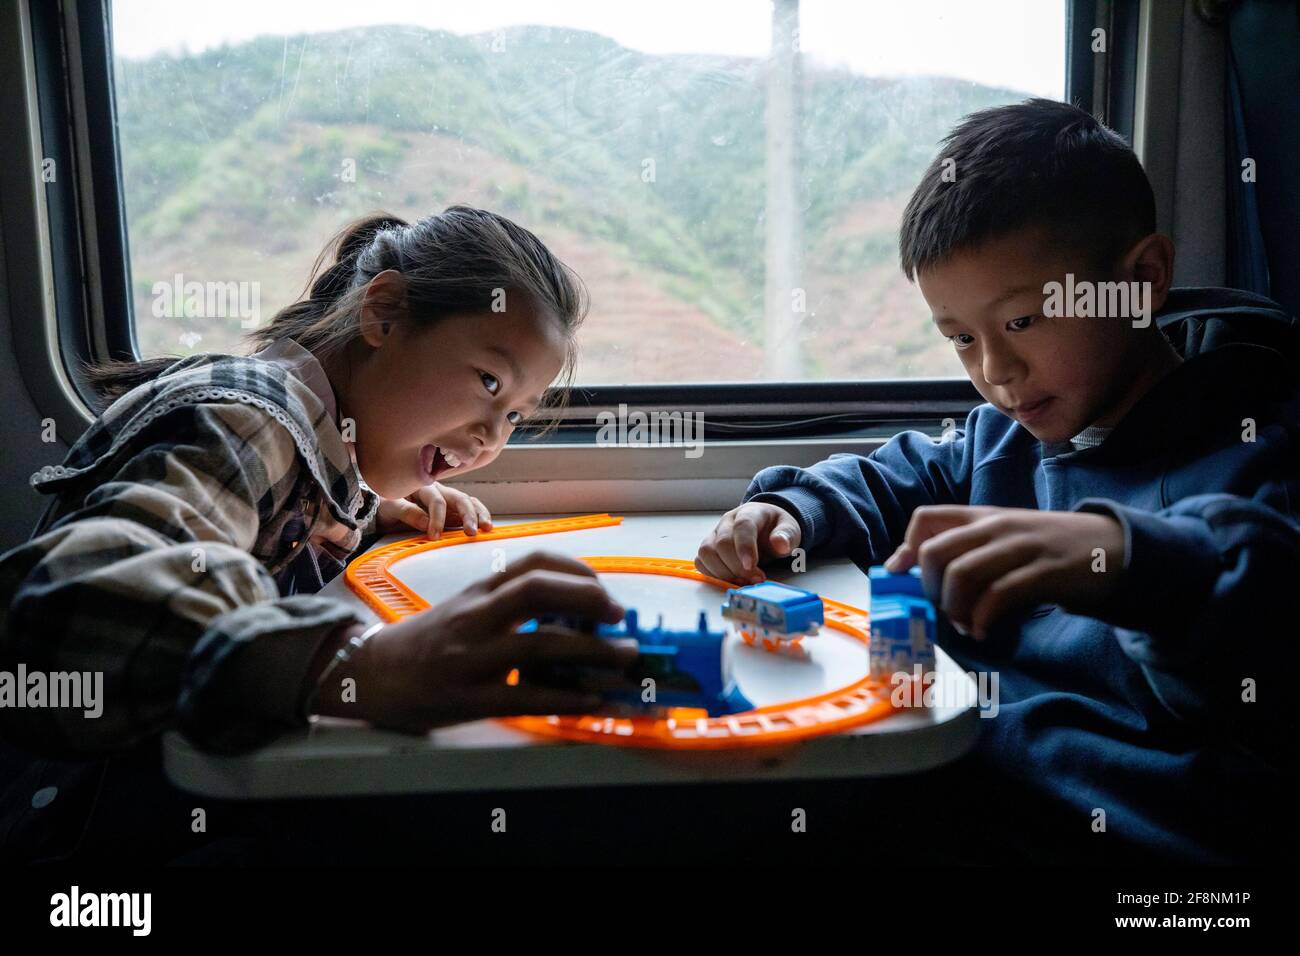 (210415) -- XICHANG, April 15, 2021 (Xinhua) -- Students take the 5633 train to school in southwest China's Sichuan Province, April 11, 2021. As modern high-speed trains shoot past new stations throughout China, a pair of slow-speed trains still run through Daliang Mountains. The 5633/5634 trains run between Puxiong and Panzhihua of Sichuan Province with an average speed less than 40 km per hour. The journey with 26 stations in between takes eleven hours and four minutes, with the ticket prices ranging from 2 yuan to 25.5 yuan(about 0.3-3.9 U.S. dollars). The slow-speed trains send childr Stock Photo